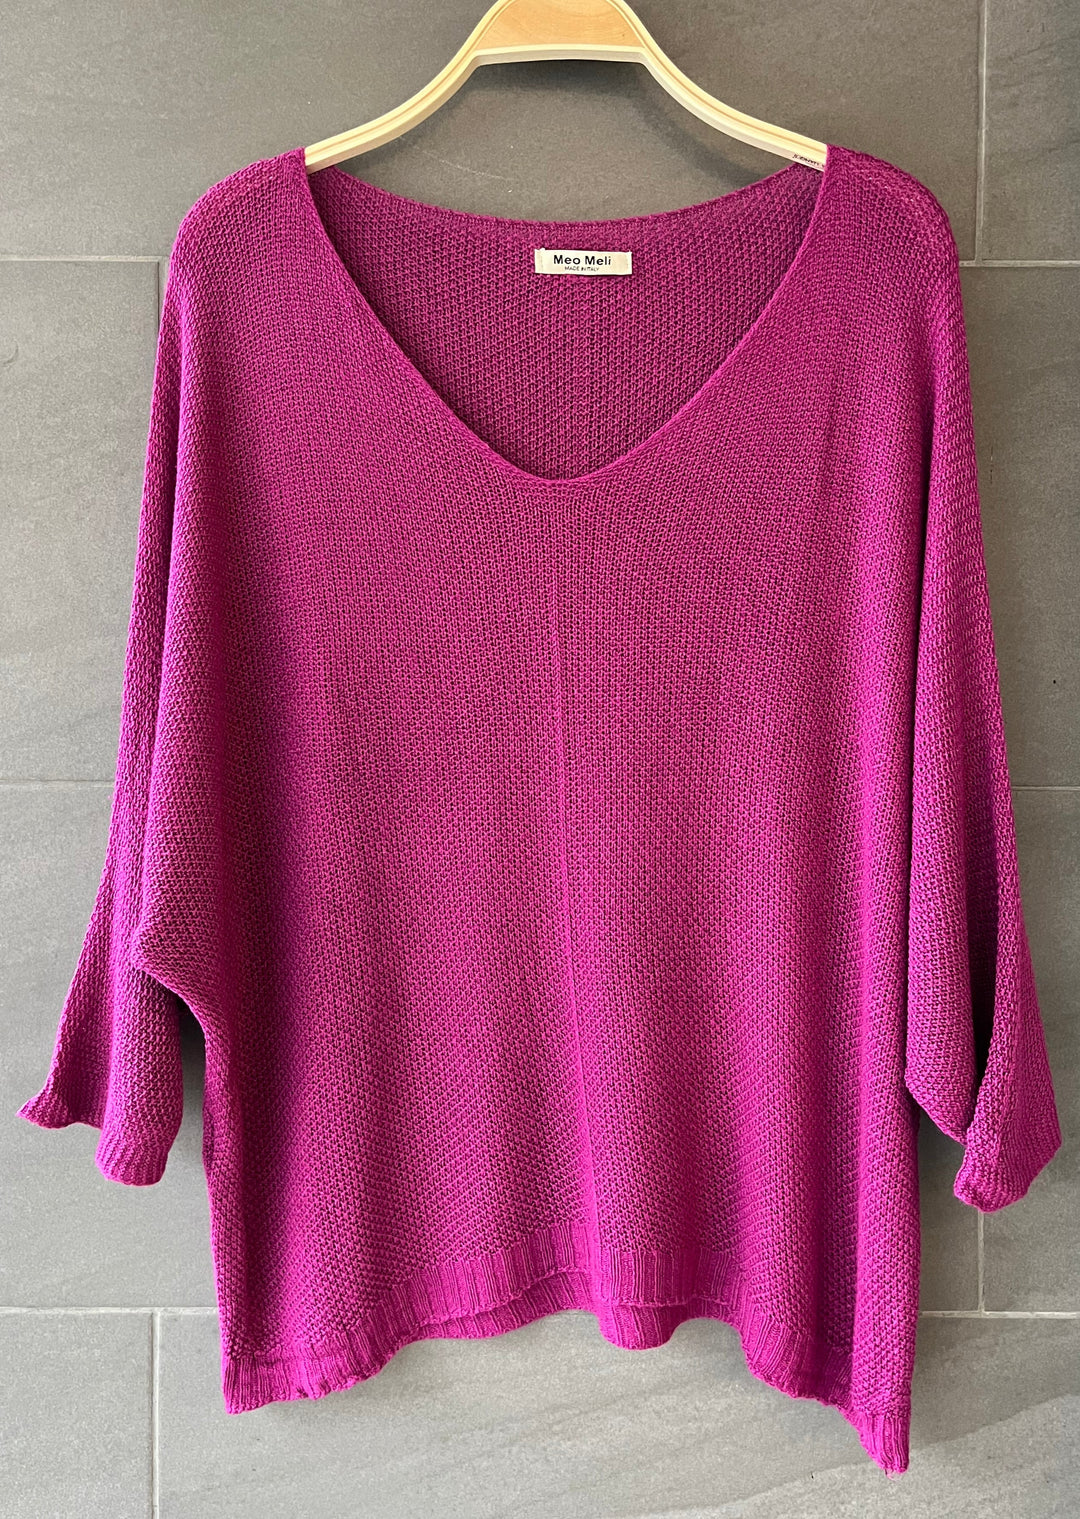 Meo Light Knit Sweater (Orchid)